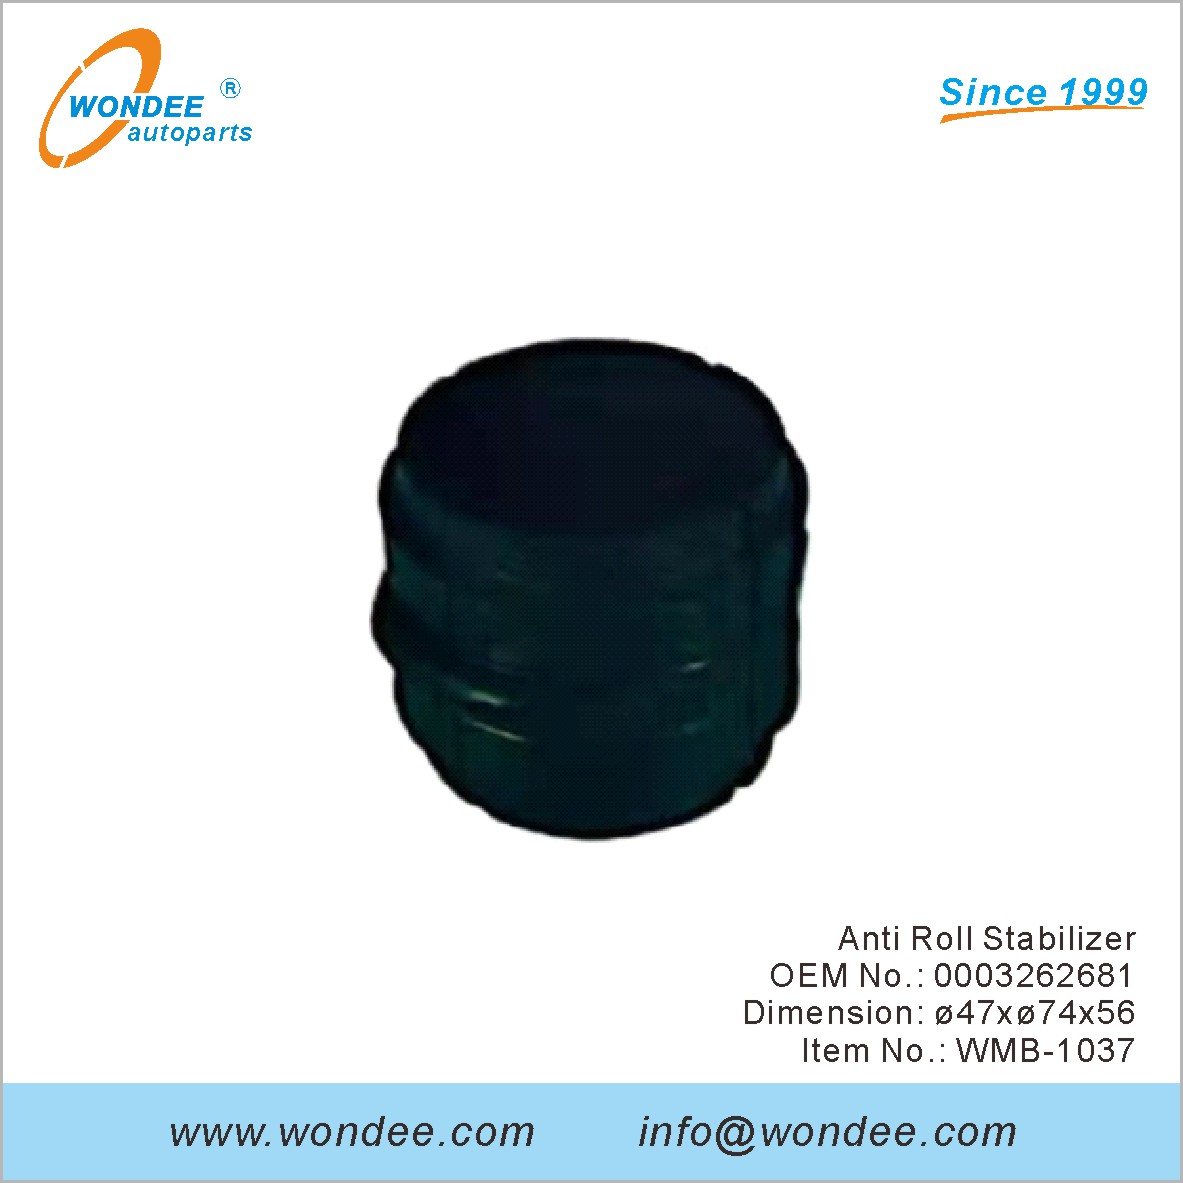 Anti Roll Stabilizer OEM 0003262681 for Benz from WONDEE